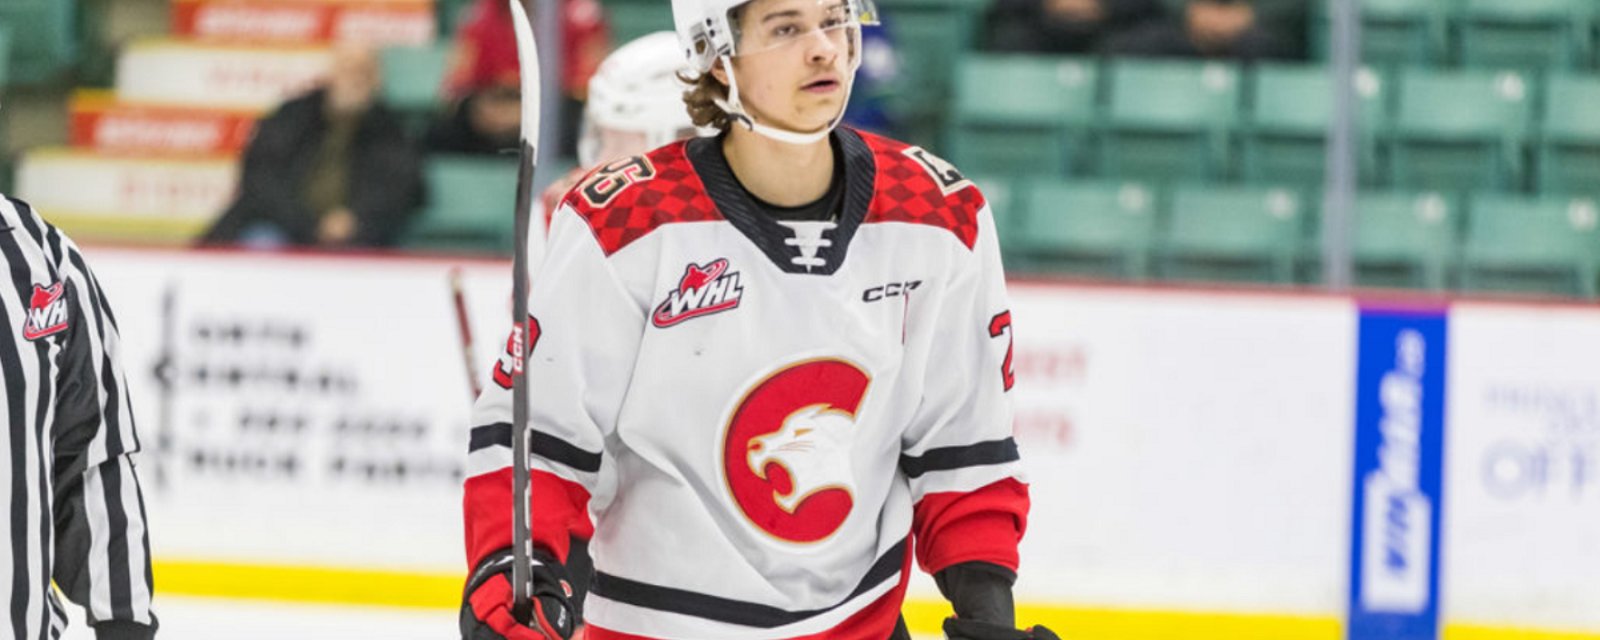 Chase Wheatcroft signs NHL deal after 104 point season in the WHL.